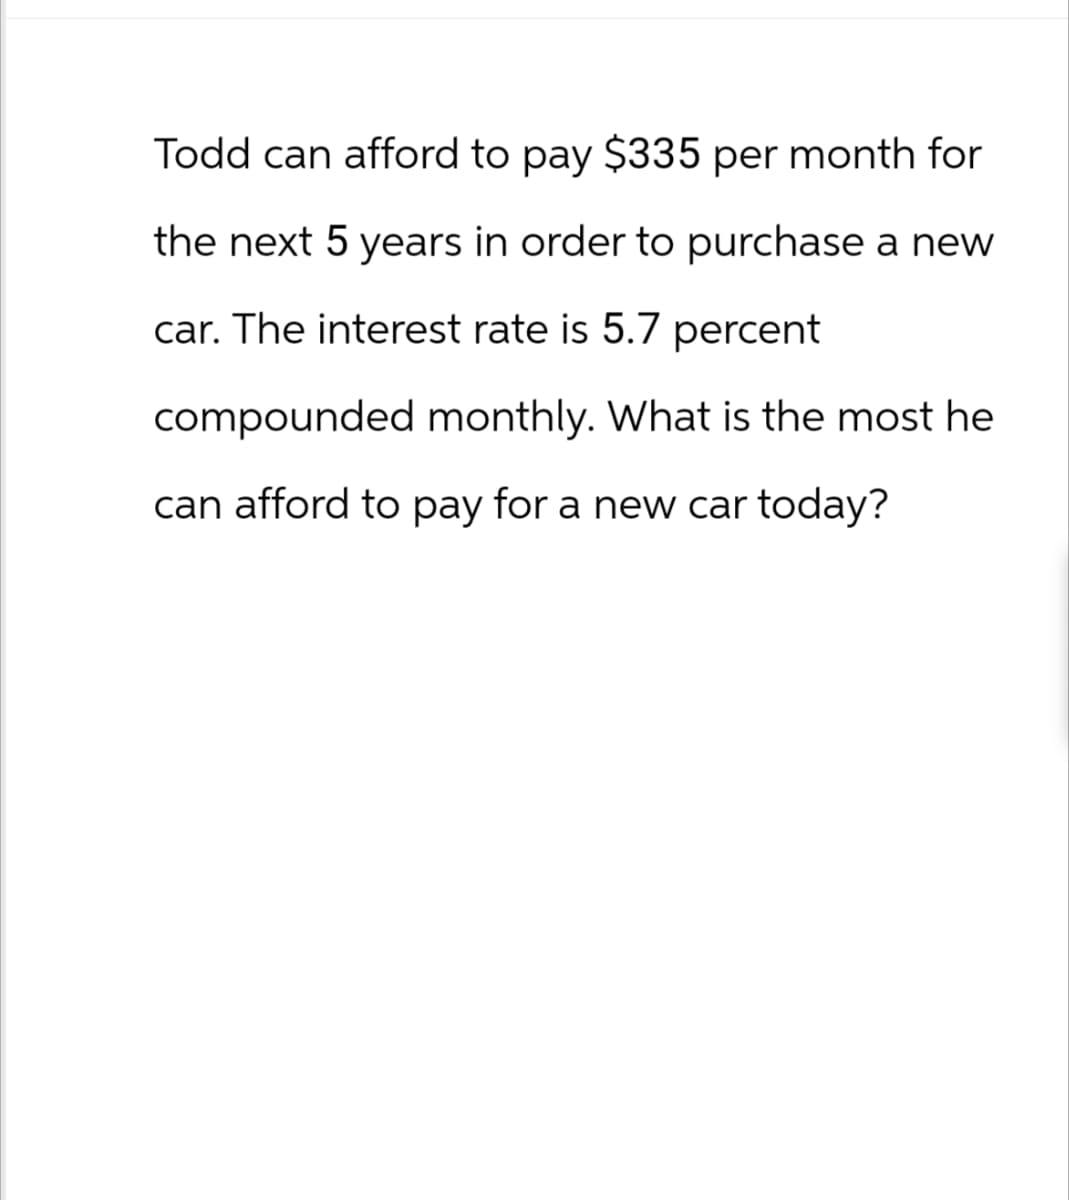 Todd can afford to pay $335 per month for
the next 5 years in order to purchase a new
car. The interest rate is 5.7 percent
compounded monthly. What is the most he
can afford to pay for a new car today?